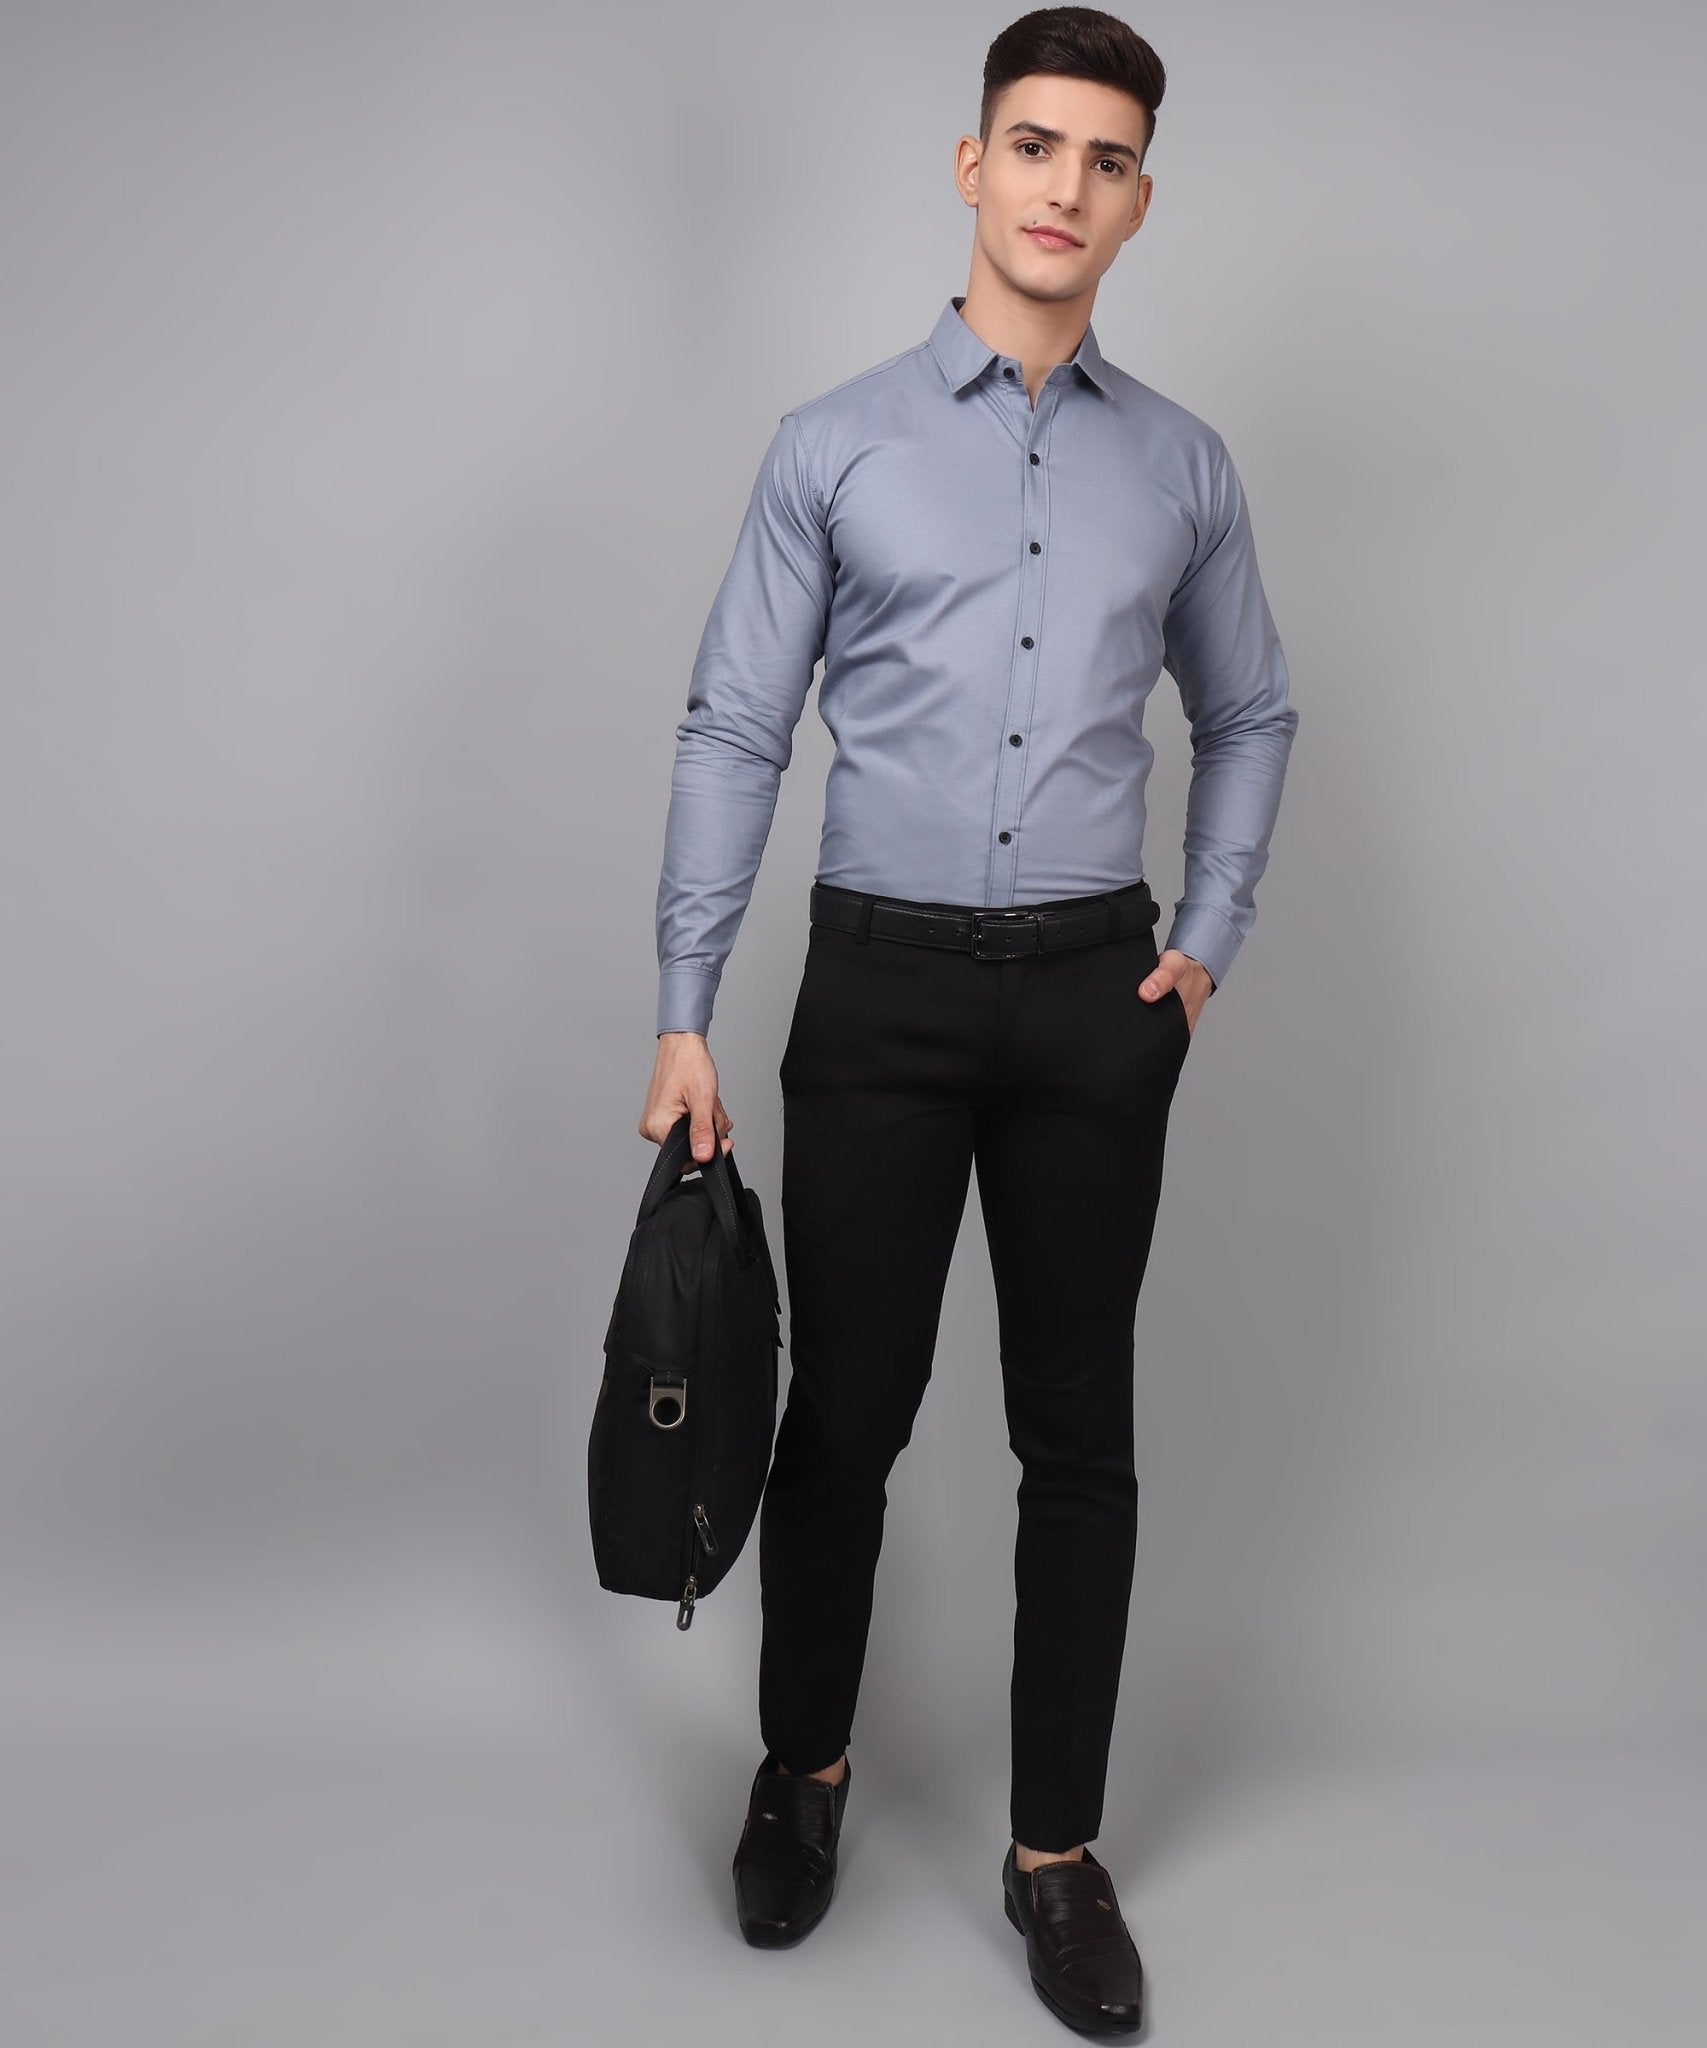 How to Find the Perfect Button-Down Shirt? - TryBuy® USA🇺🇸